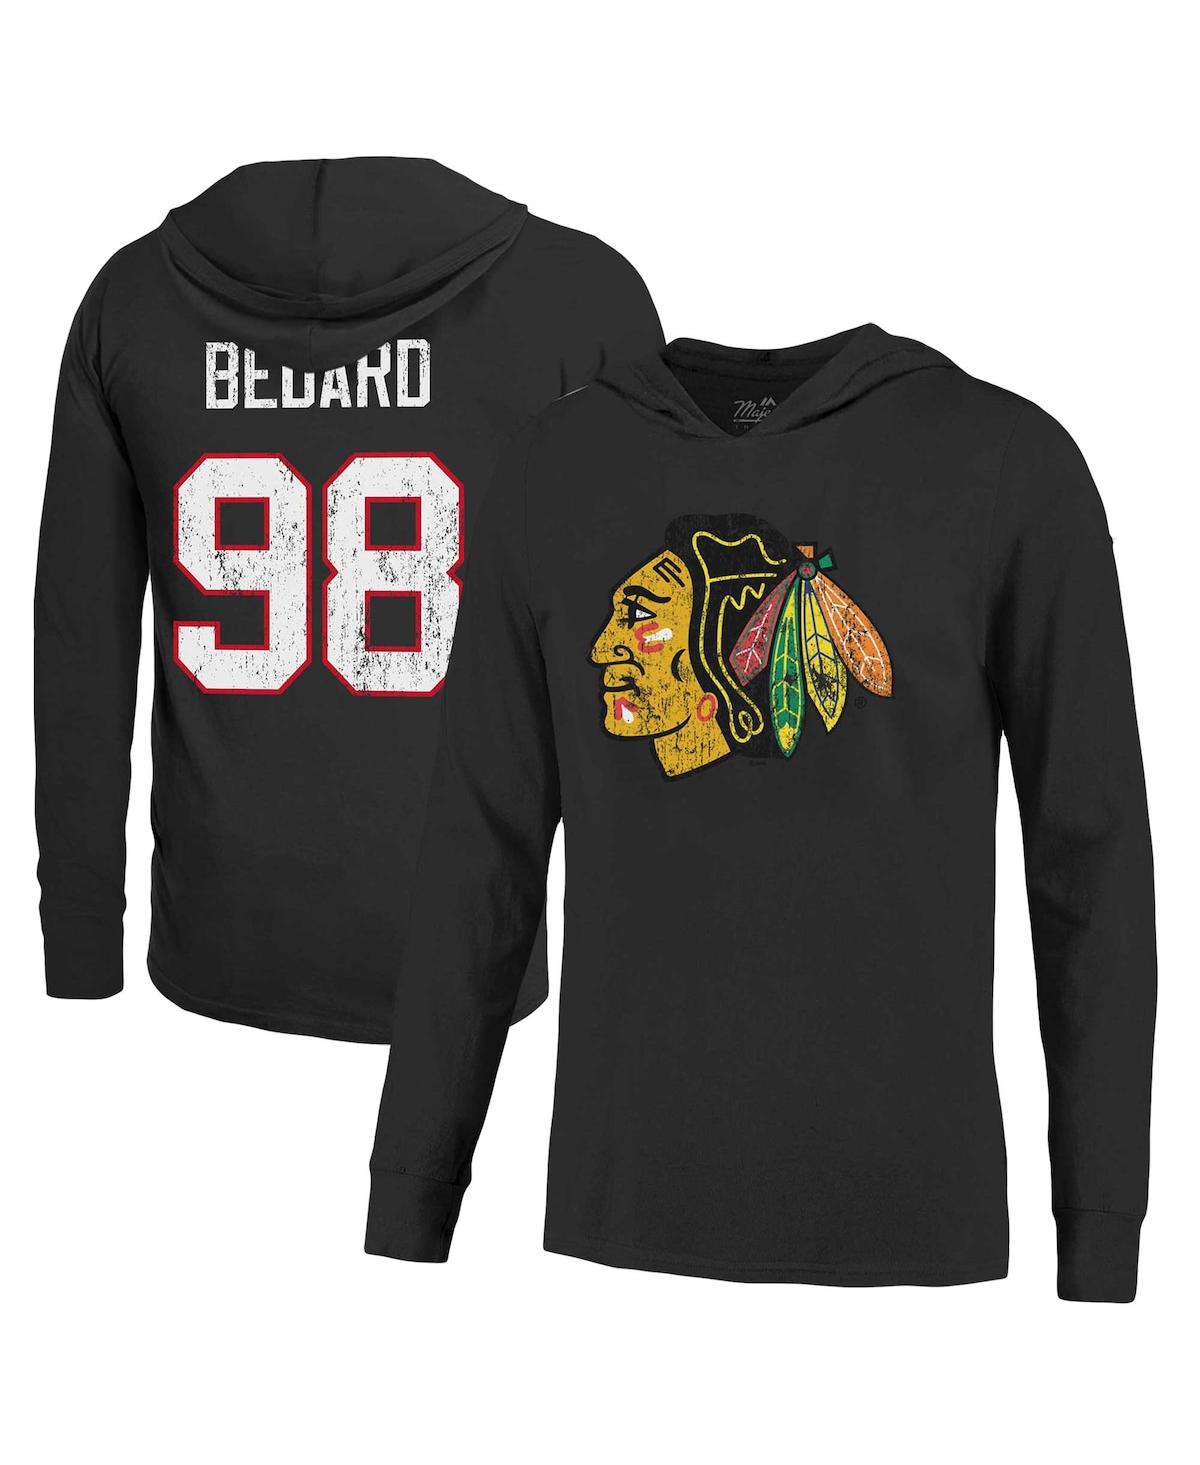 Men's Majestic Threads Connor Bedard Black Distressed Chicago Blackhawks Softhand Name and Number Pullover Hoodie - Black